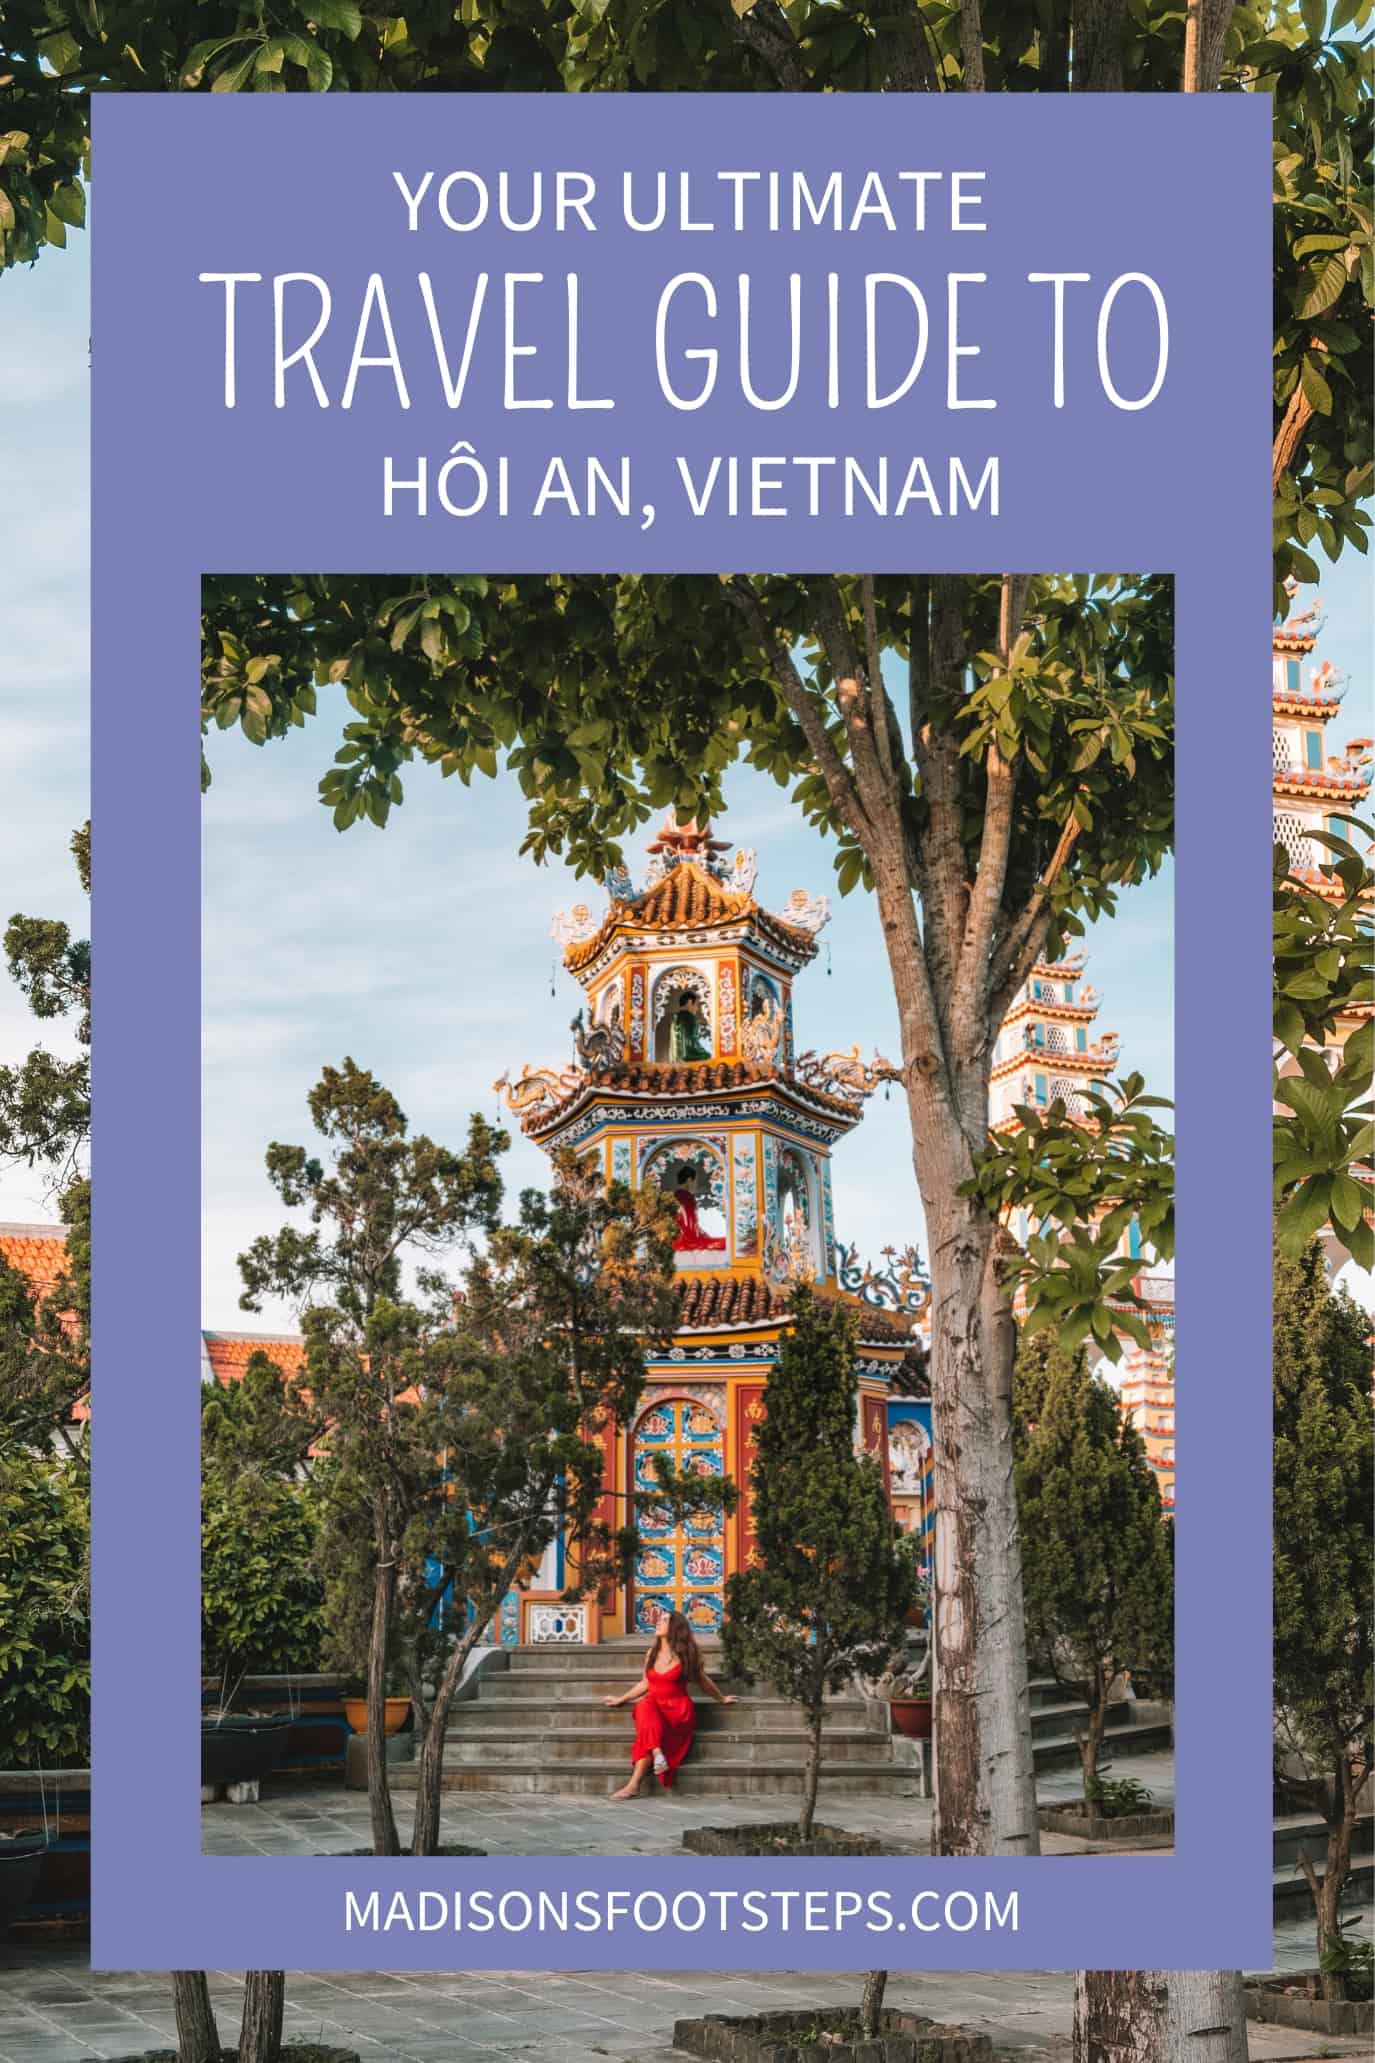 Pinterest pin for my Hoi An itinerary blog post.